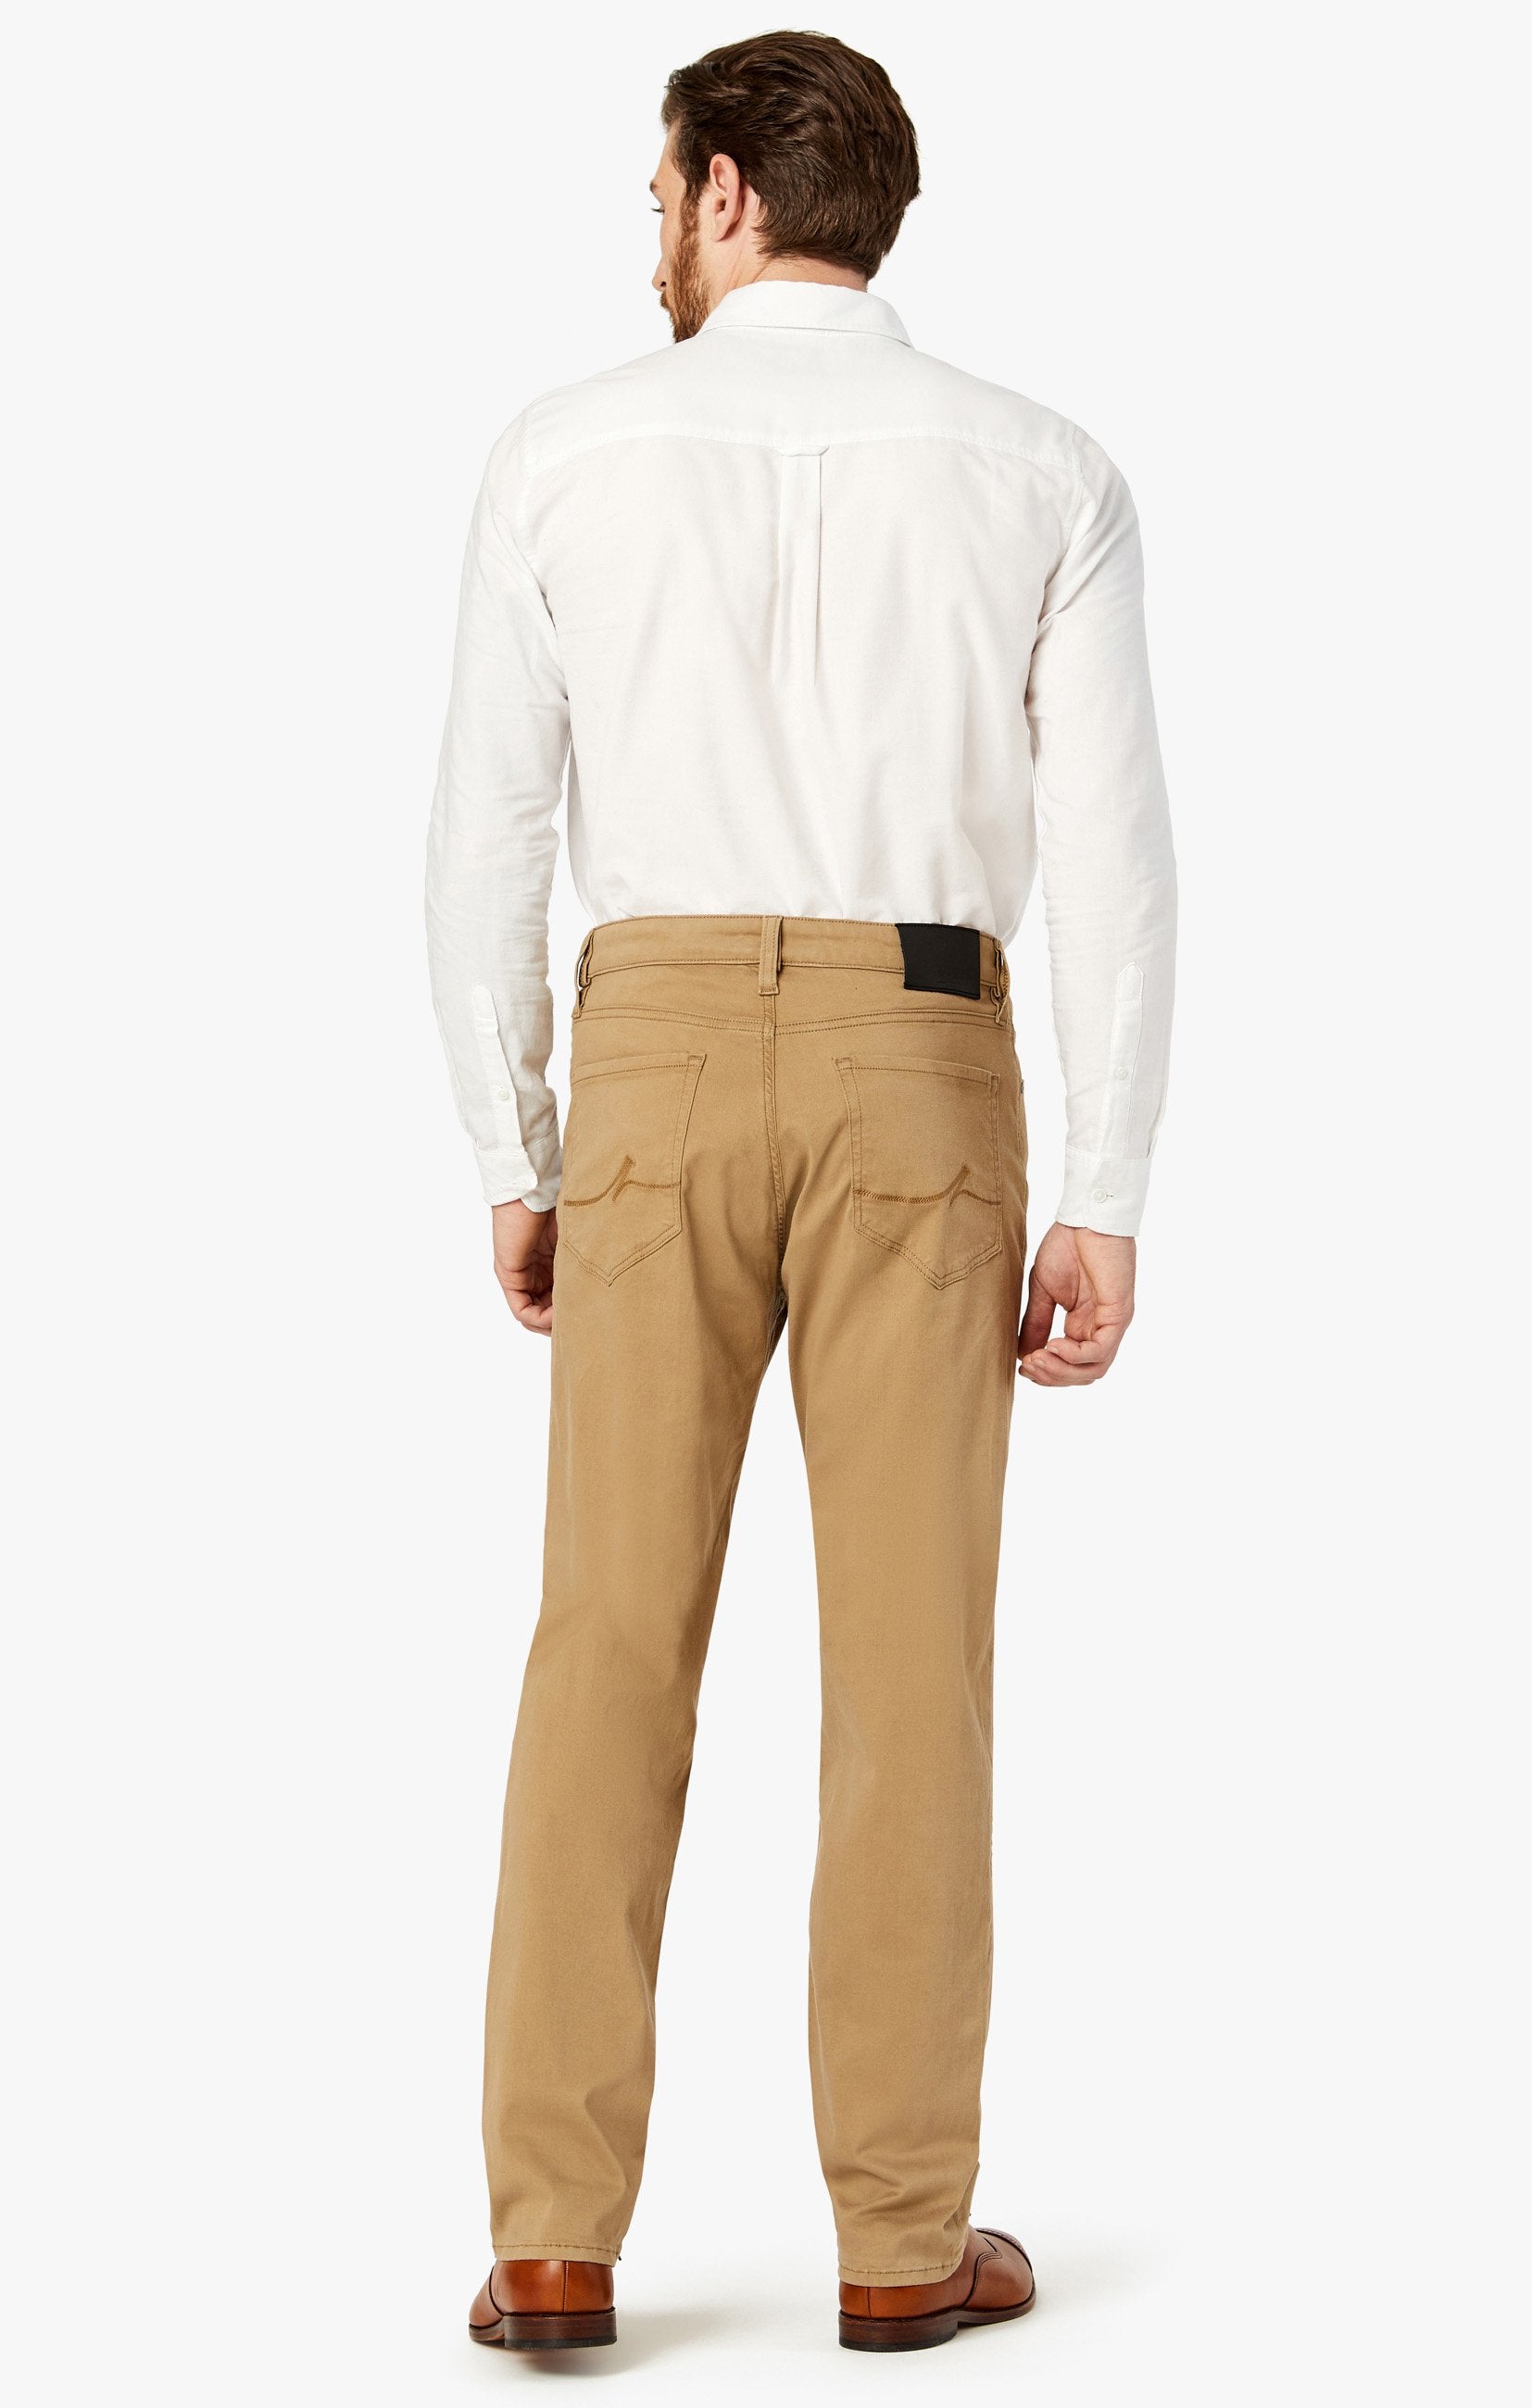 Charisma Relaxed Straight Pants In Khaki Twill